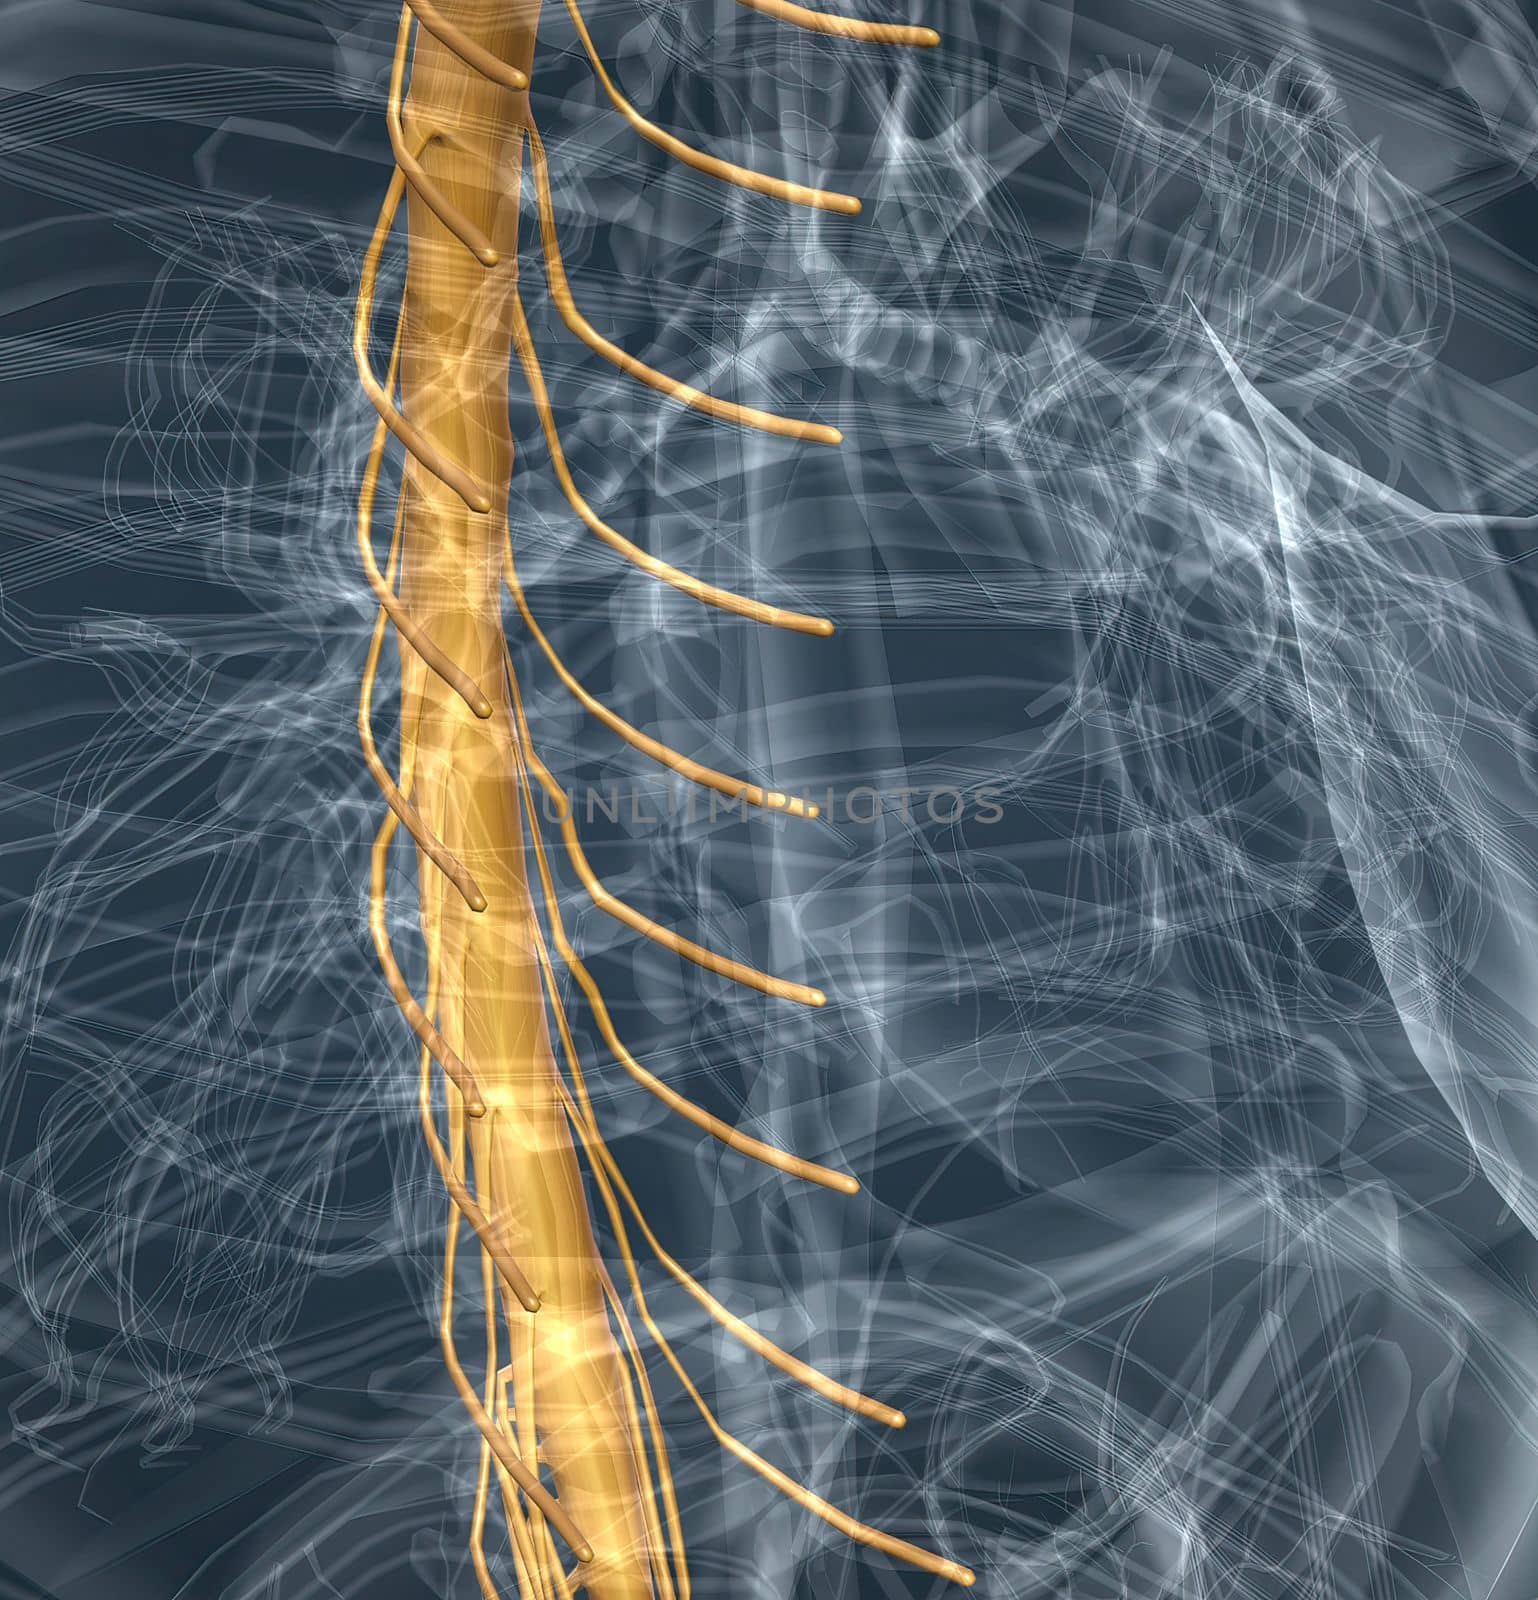 Spinal nerves are grouped into the corresponding cervical, thoracic, lumbar, sacral, and coccygeal regions of the spine. by creativepic